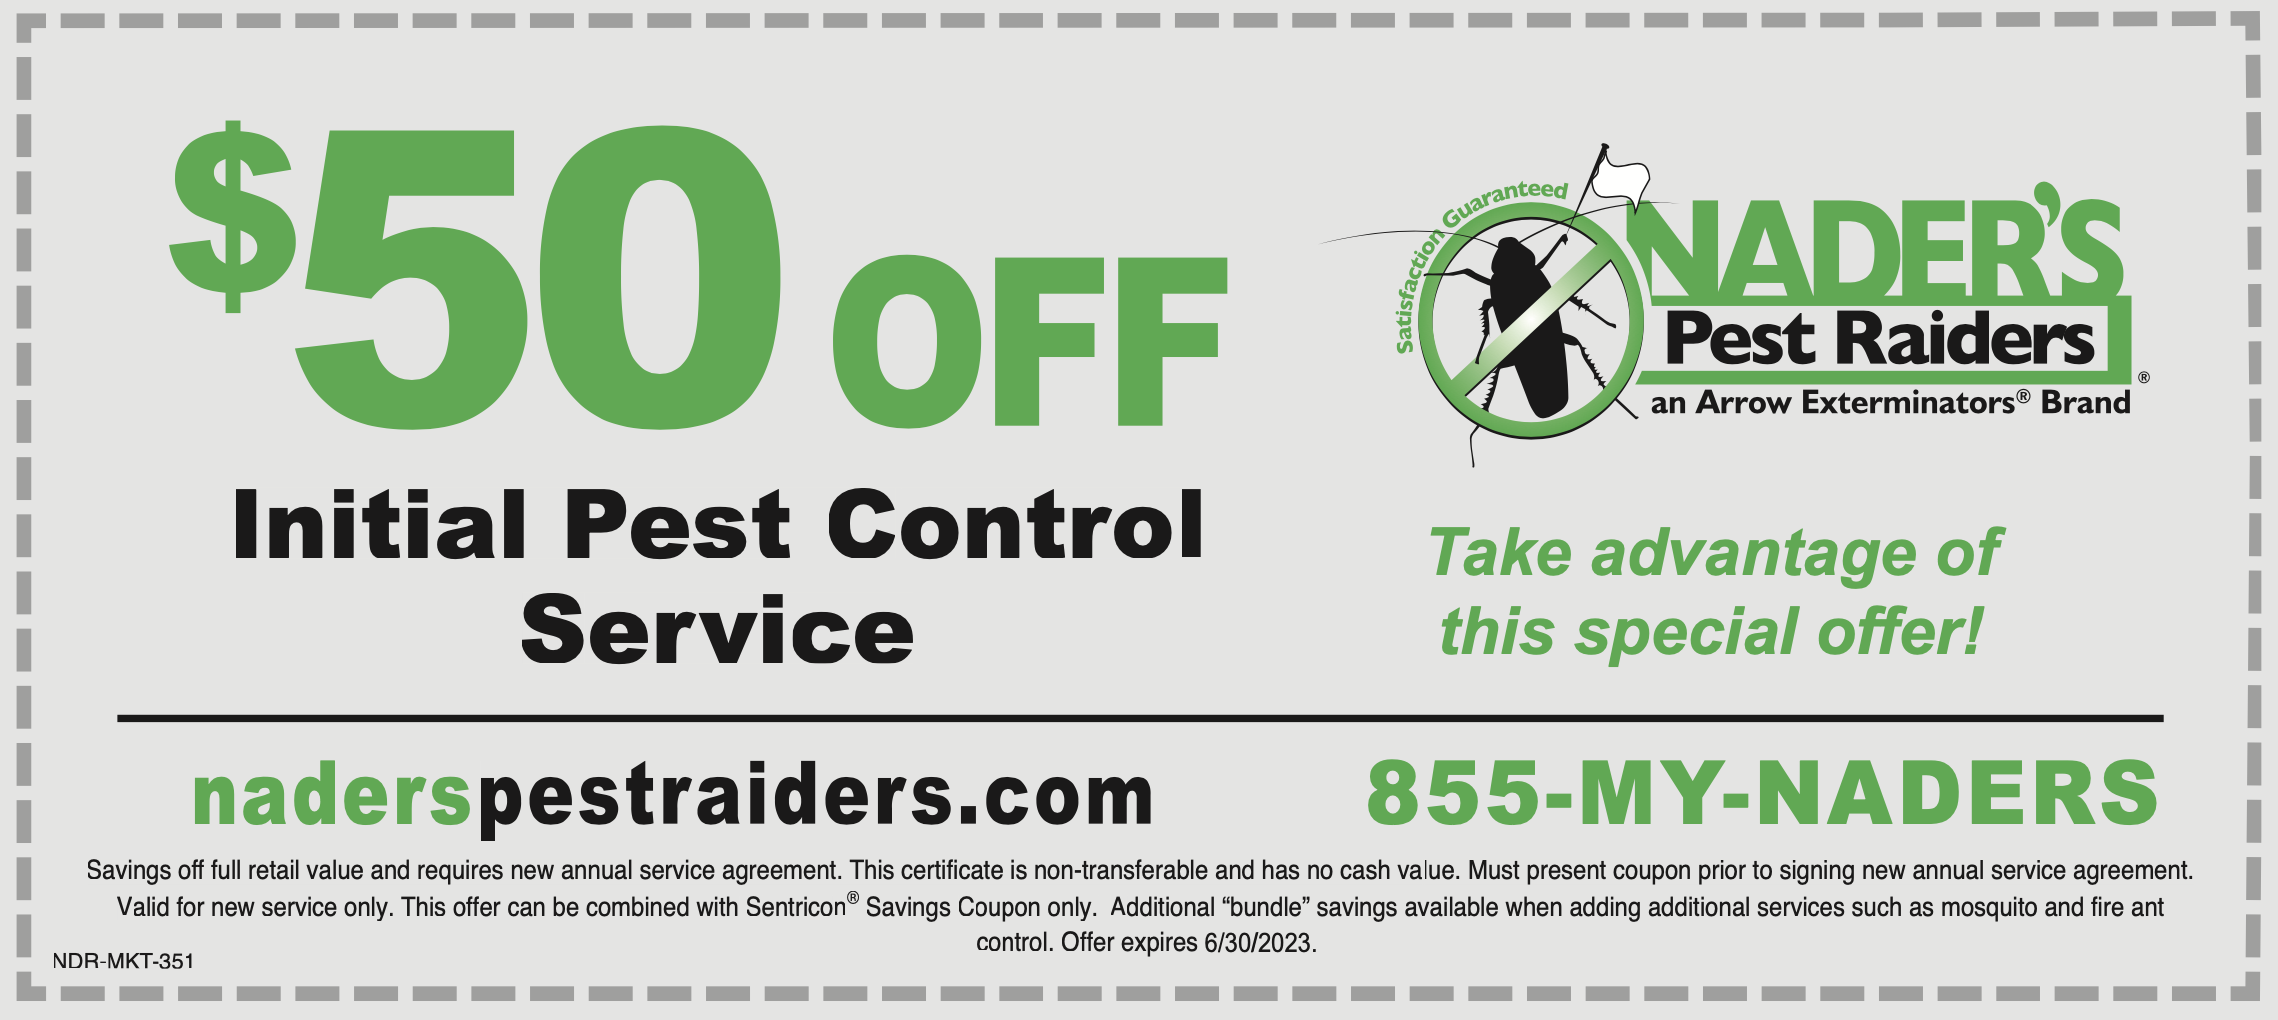 naders_pest_control_coupon_exp_2023.png